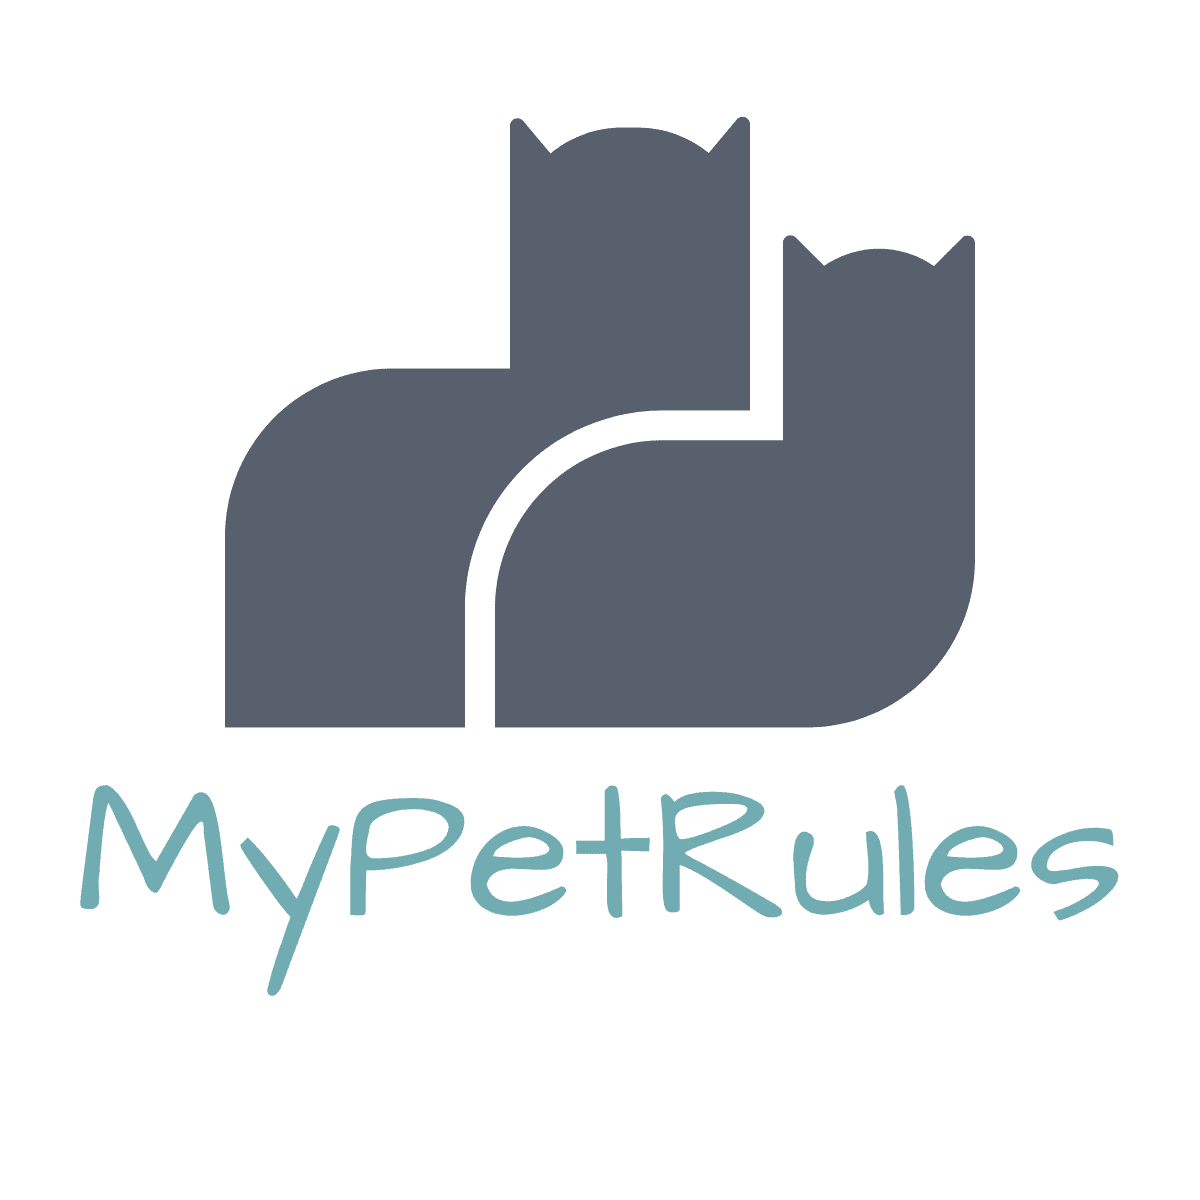 MyPetRules